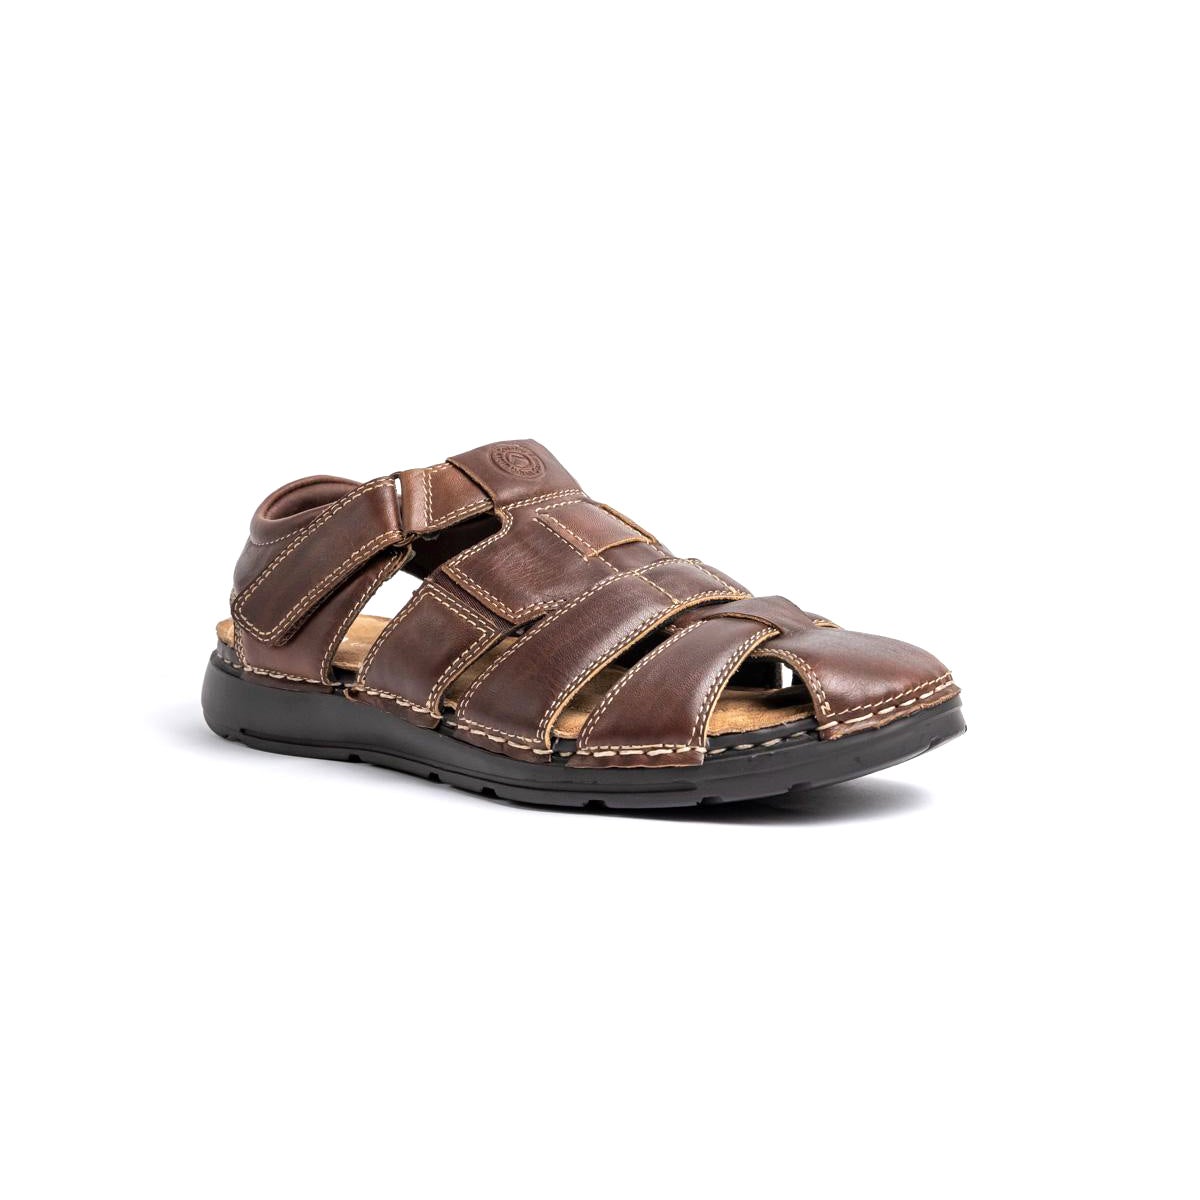 Aggregate more than 208 mens casual sandals leather